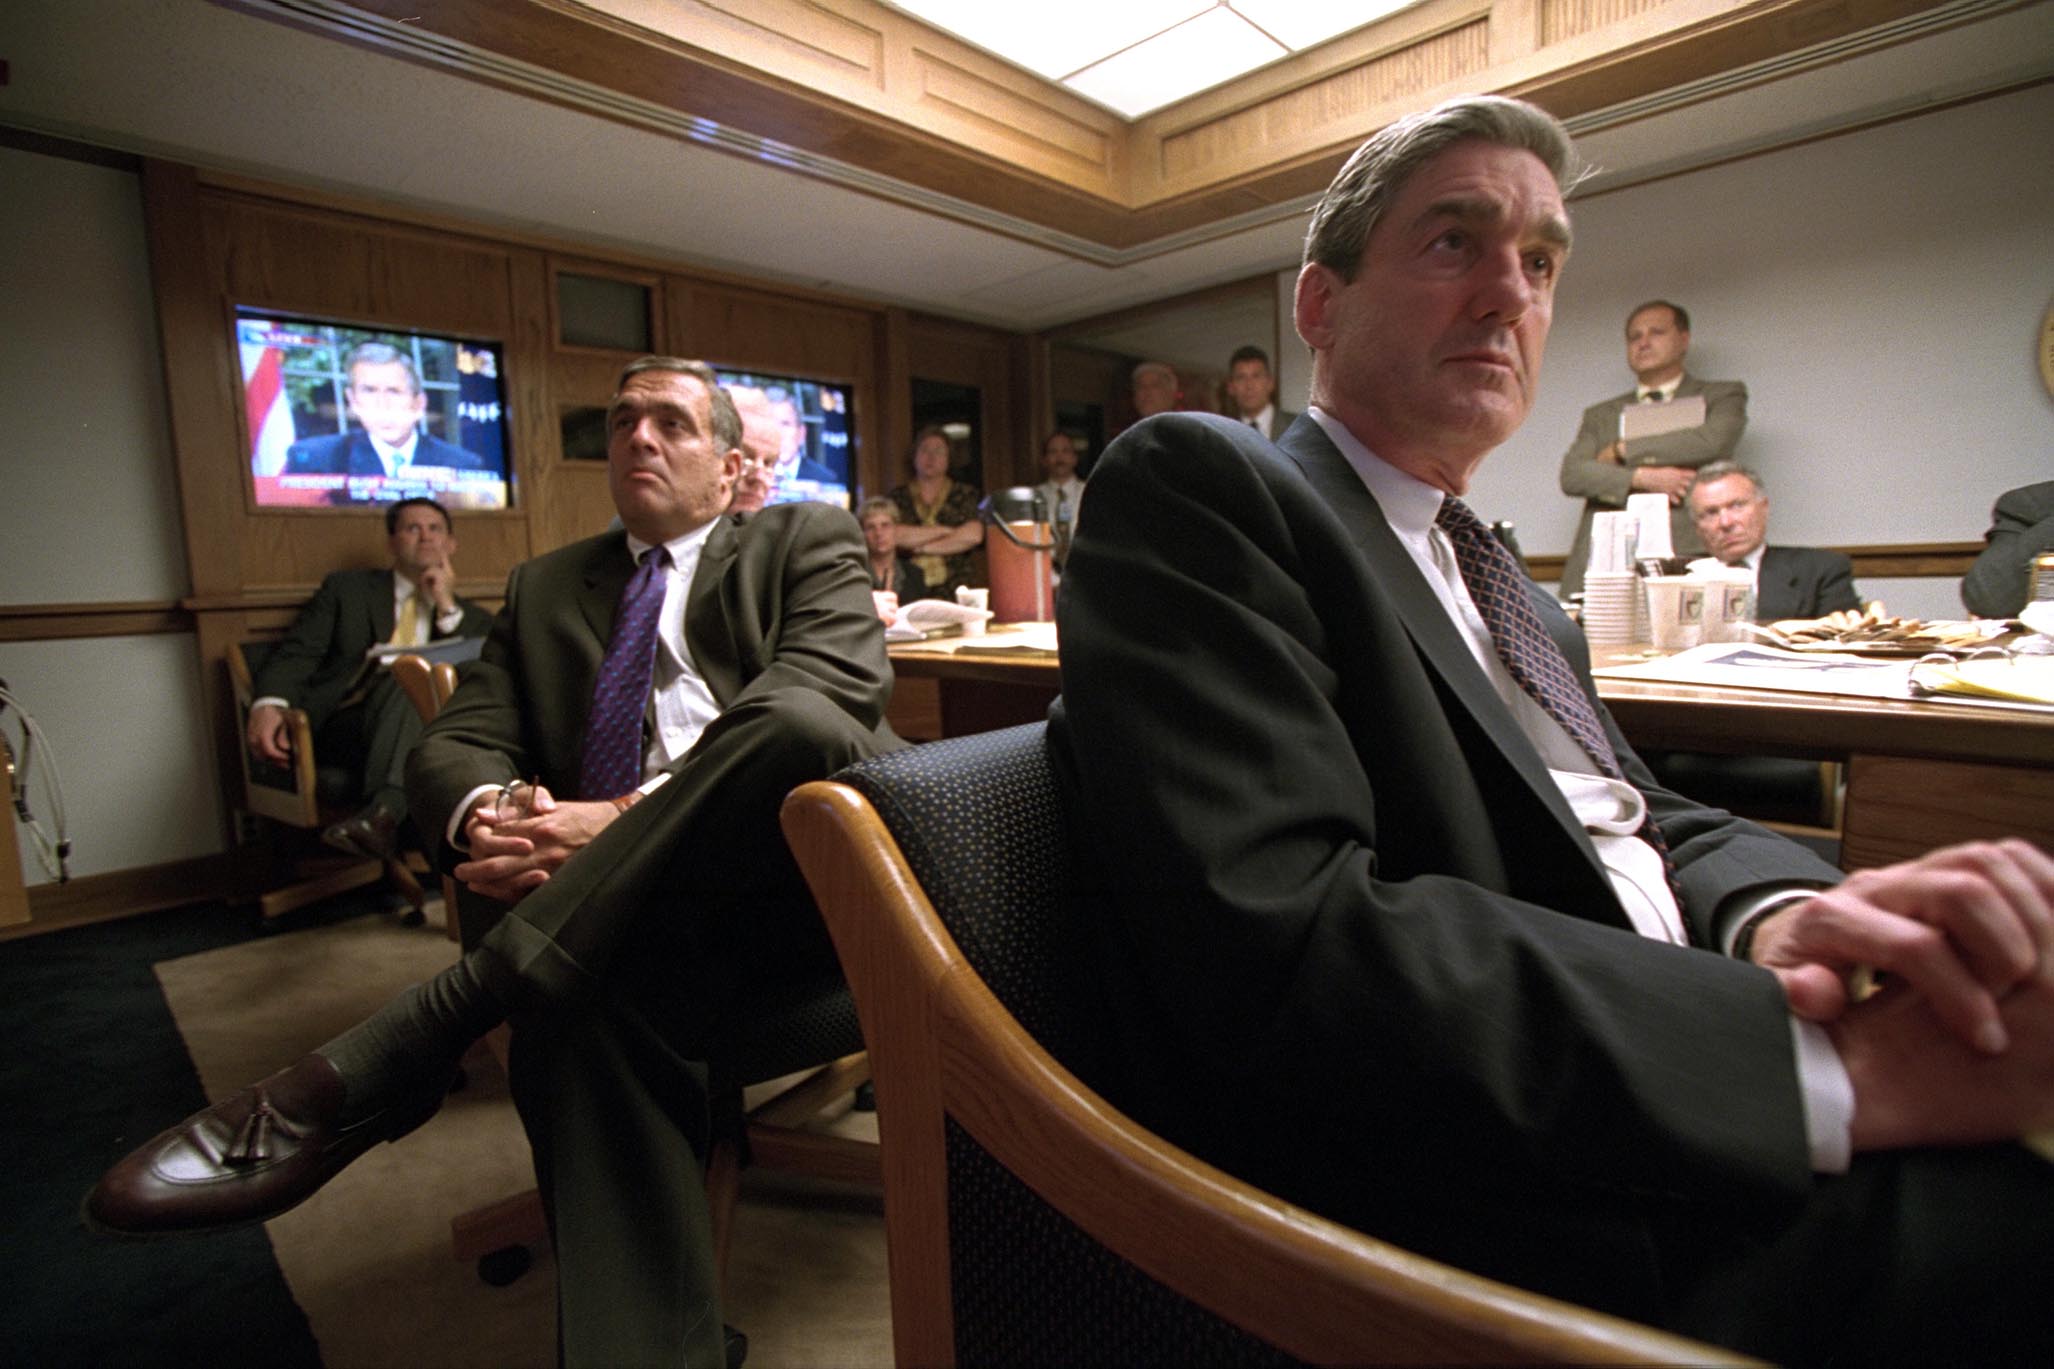 CIA Director George Tenet, left, listens to President Bush's address in the President's Emergency Operations Center